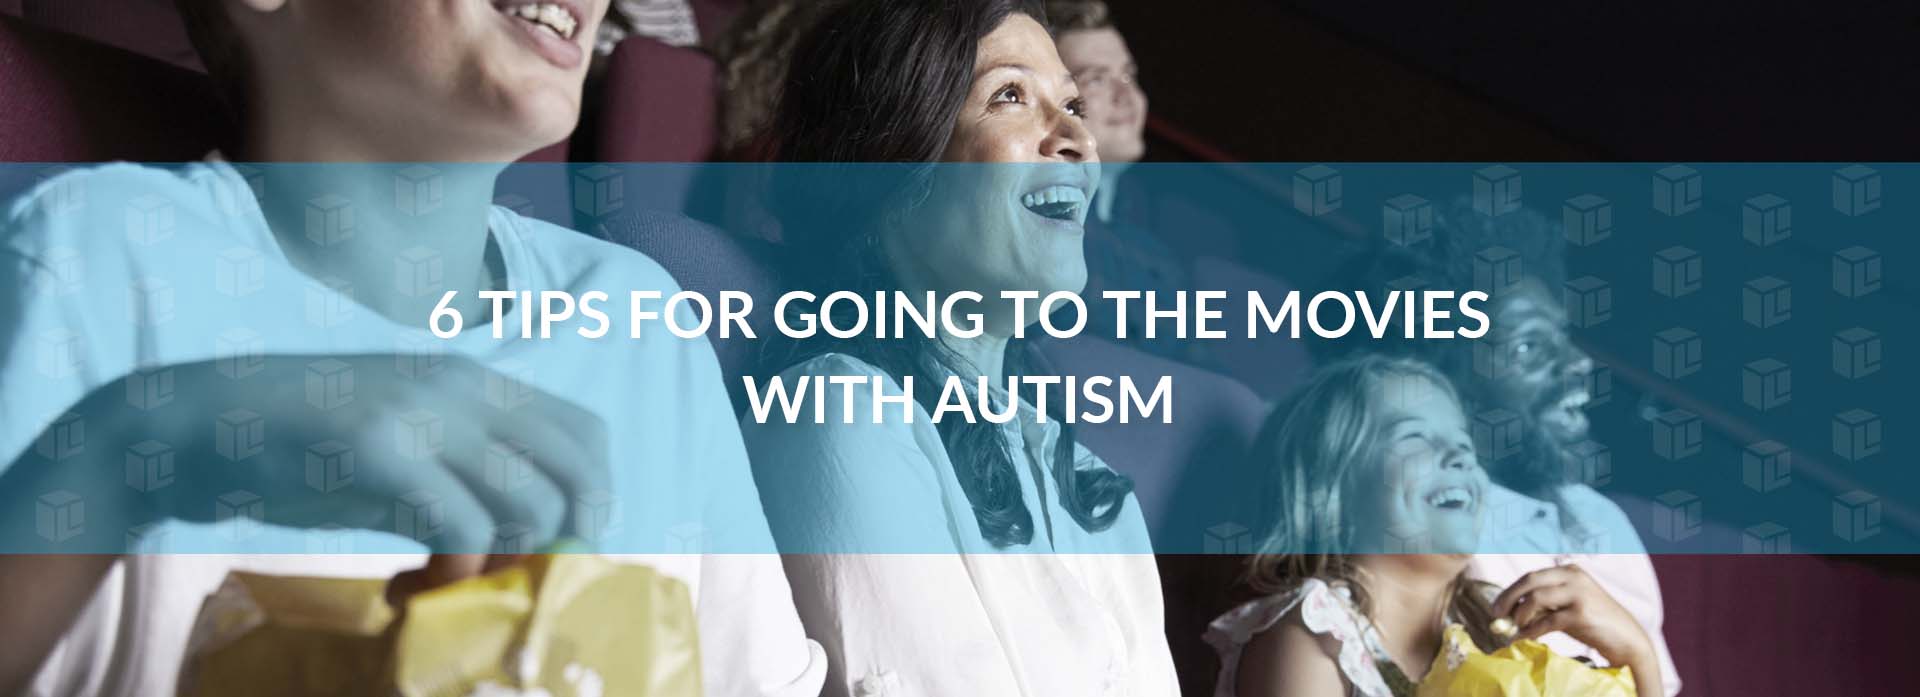 6 Tips For Going To The Movies With Autism